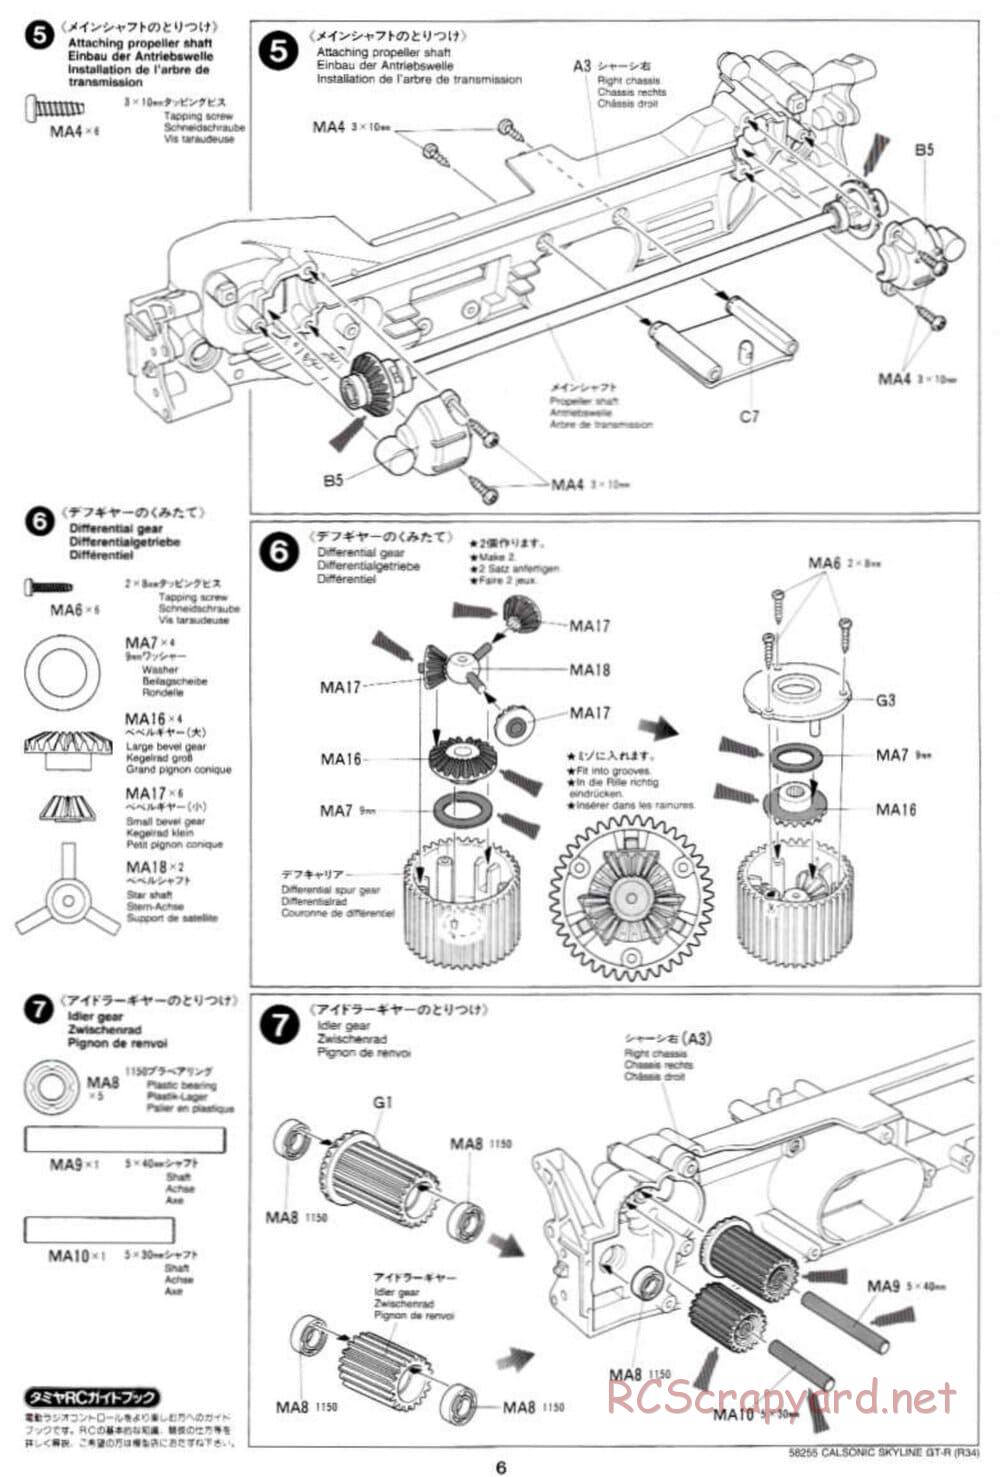 Tamiya - Calsonic Skyline GT-R (R34) - TL-01 Chassis - Manual - Page 6